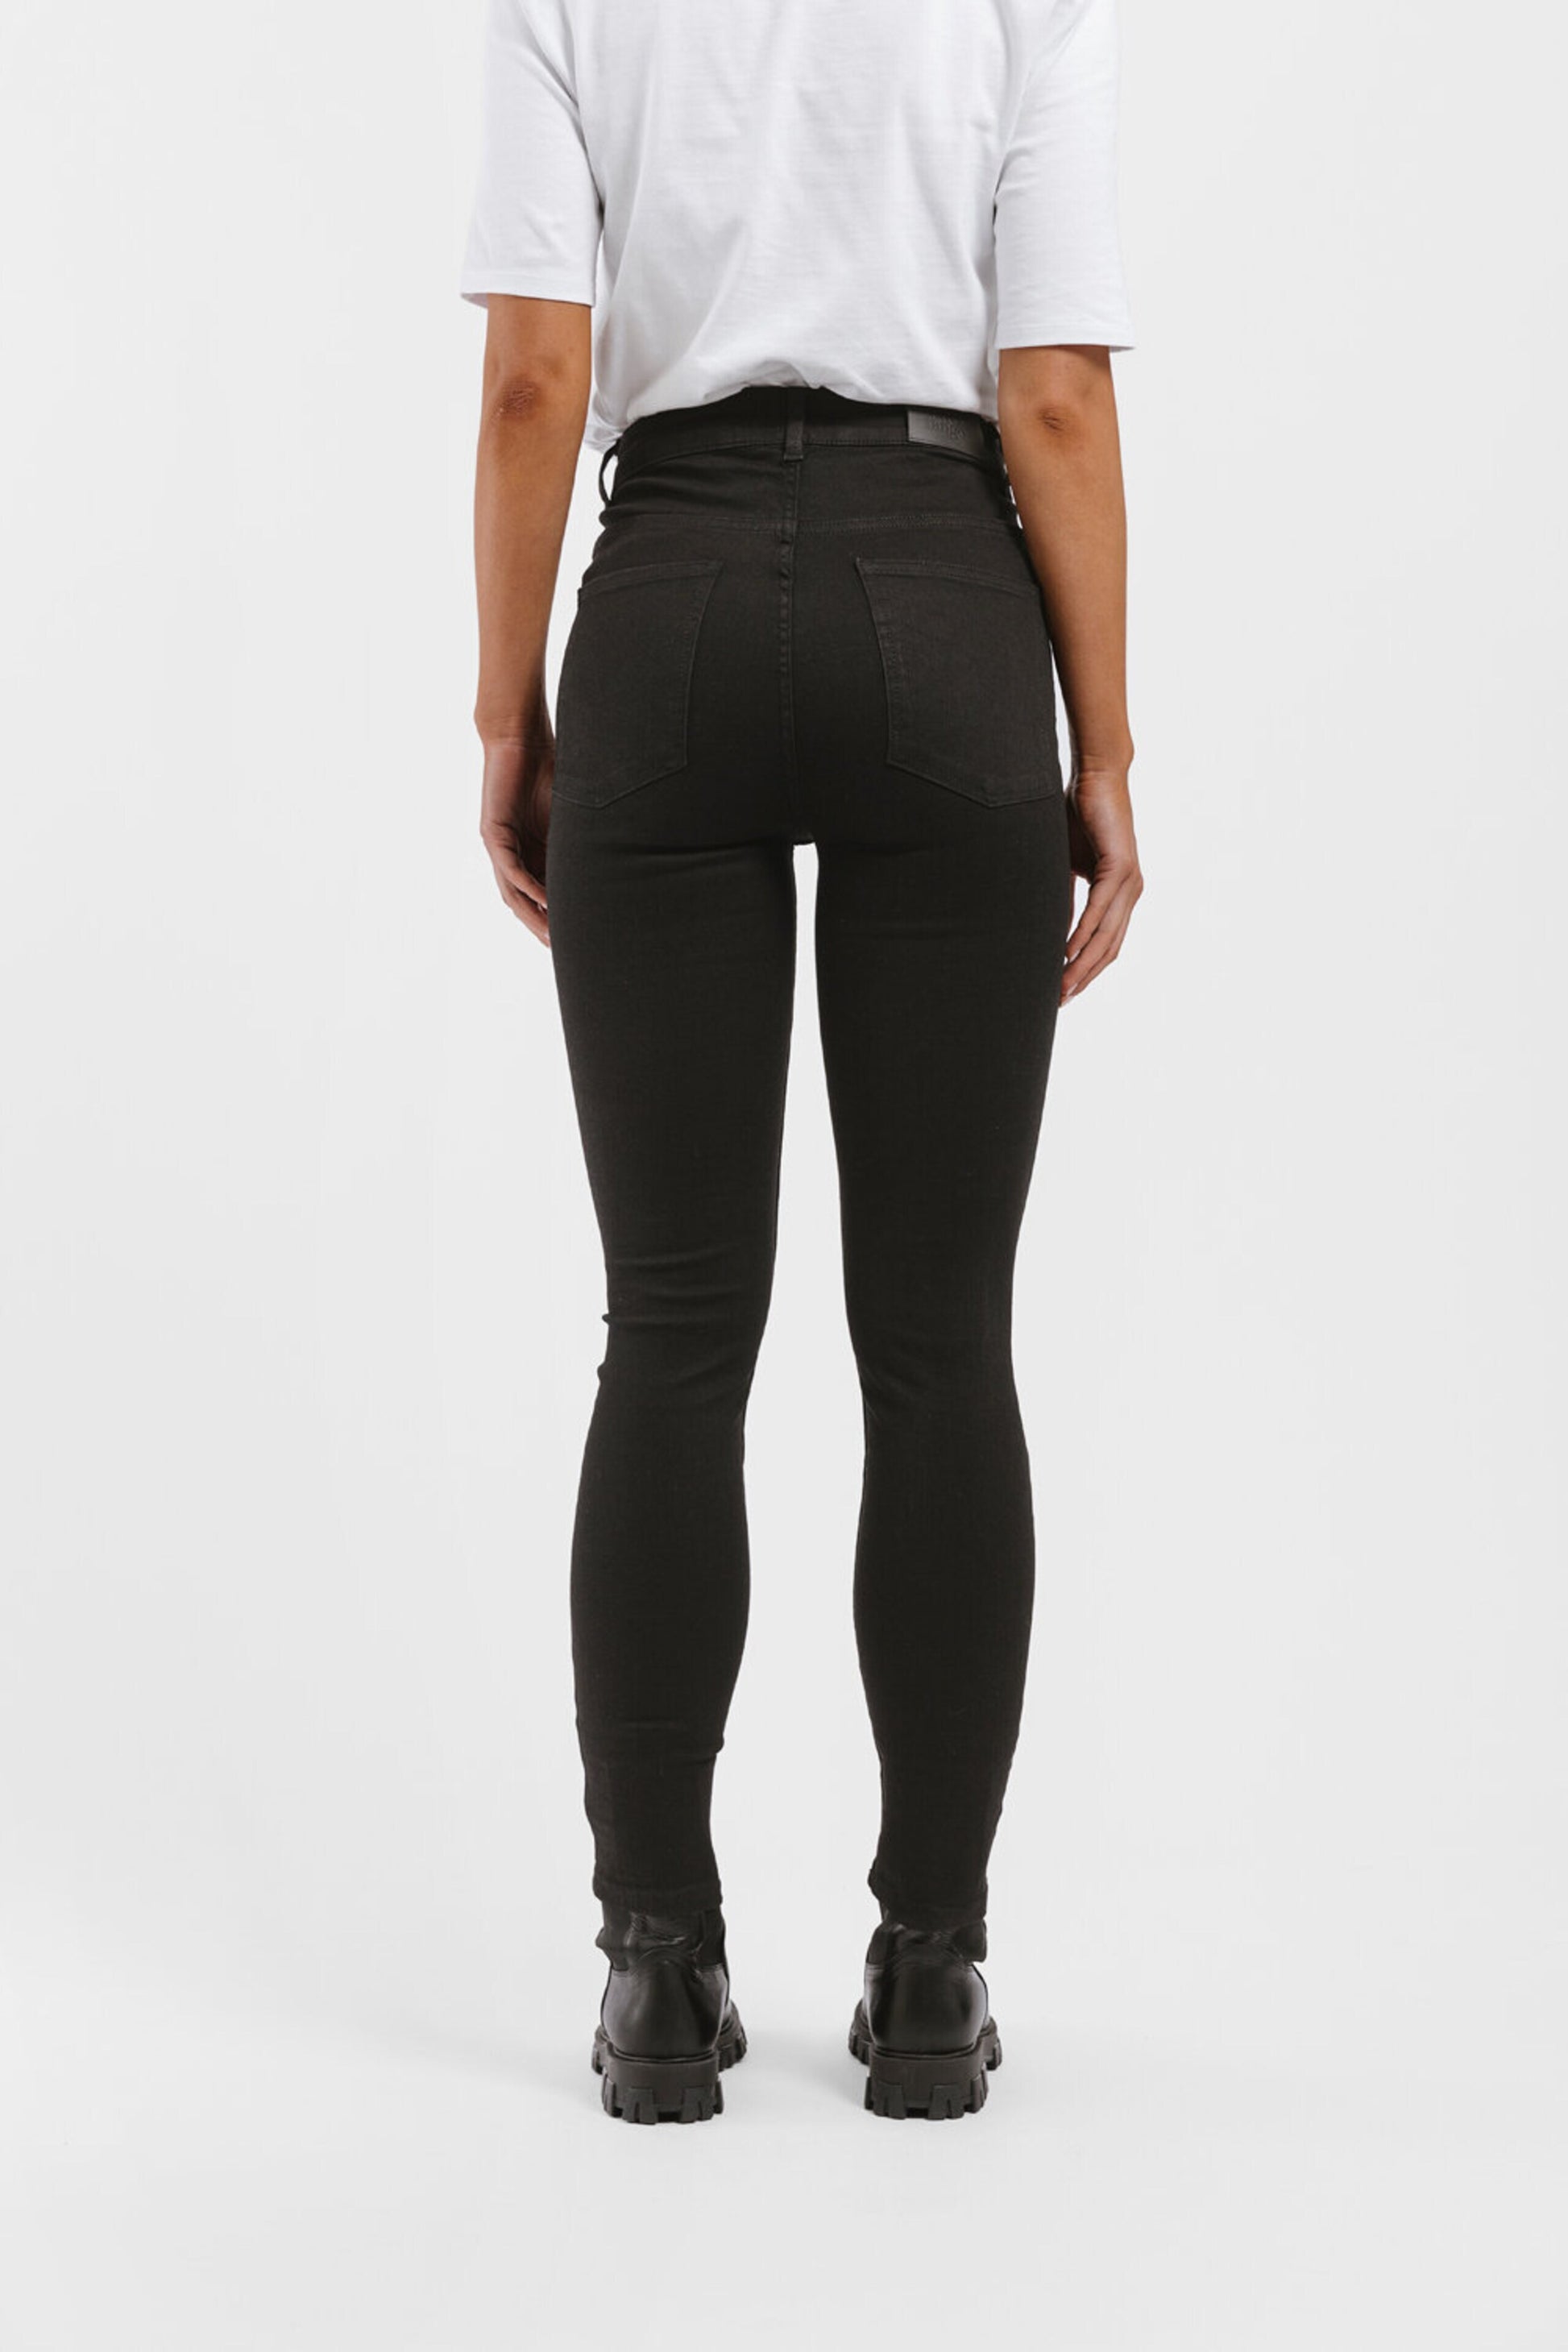 The back view of a woman wearing Twist & Tango's Julie High Waist Skinny Jeans - Black.